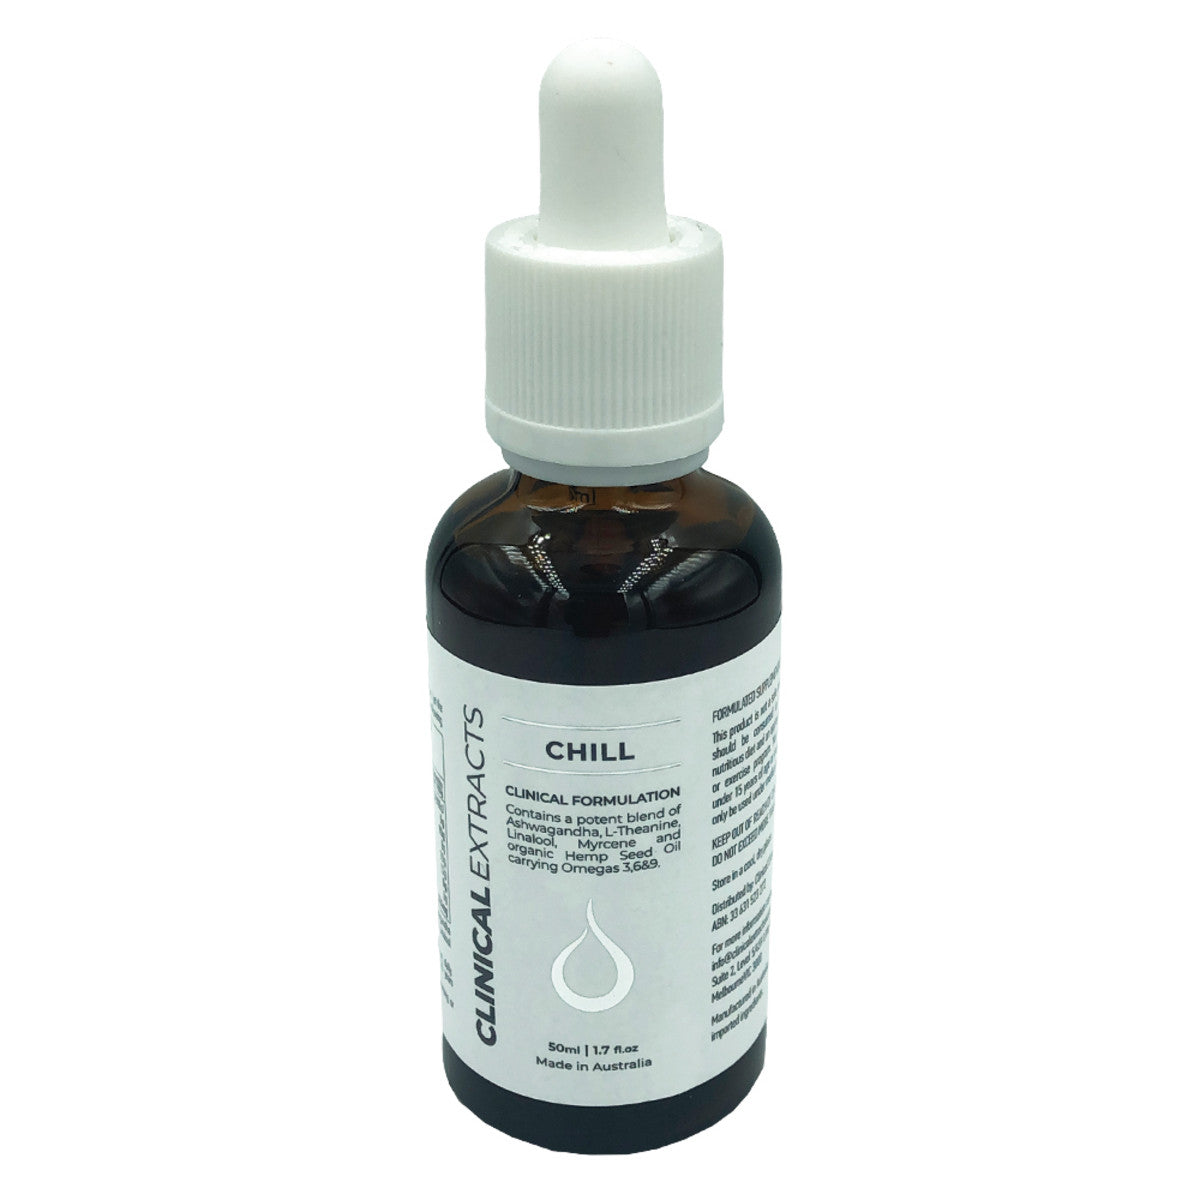 Clinical Extracts - Clinical Formulation Chill